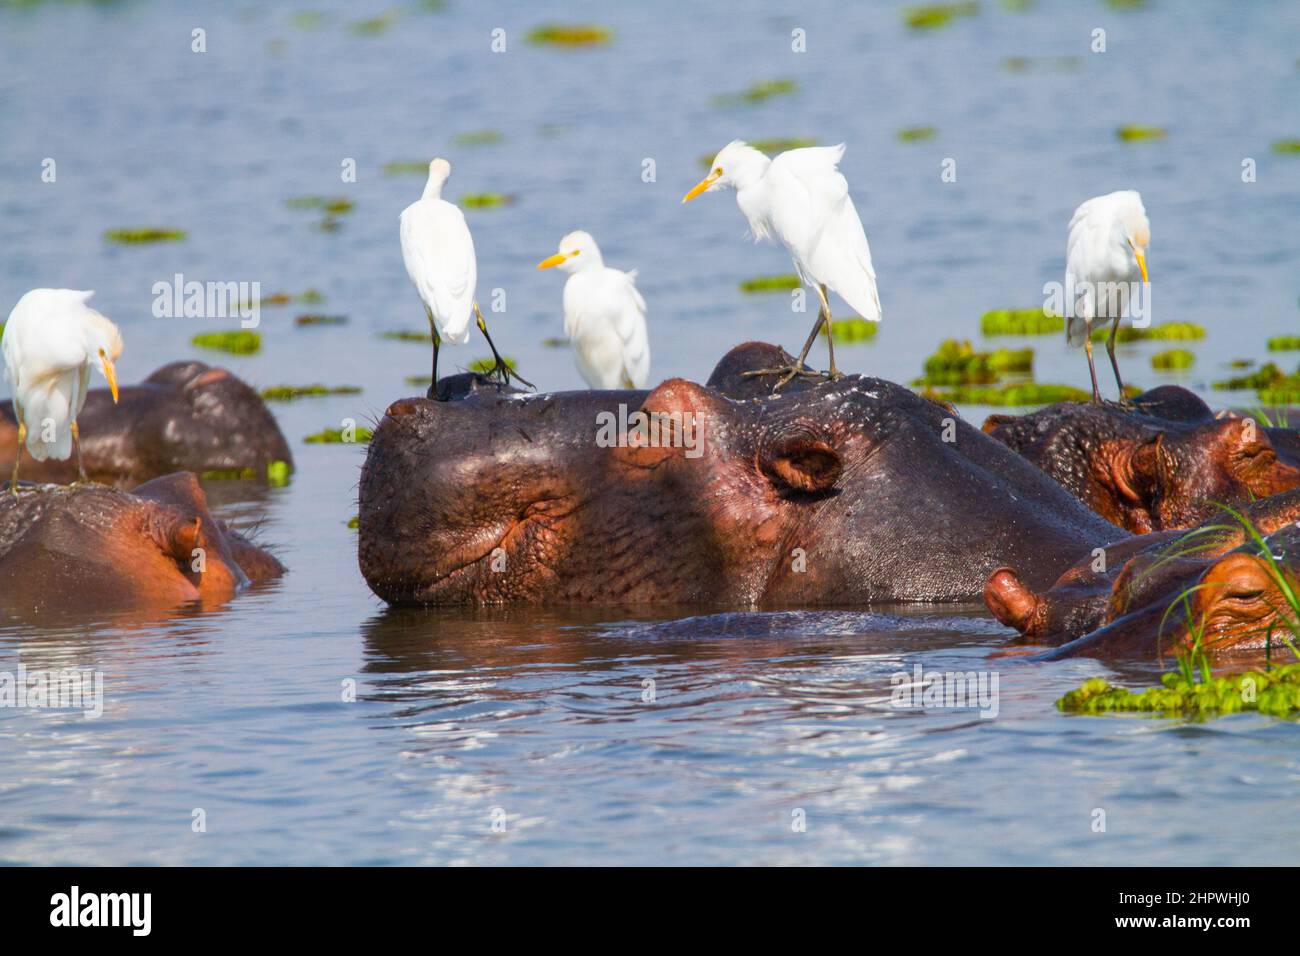 Group of hippos on Lake Victoria in Uganda Cattle egret stand on their backs  And flying around Stock Photo